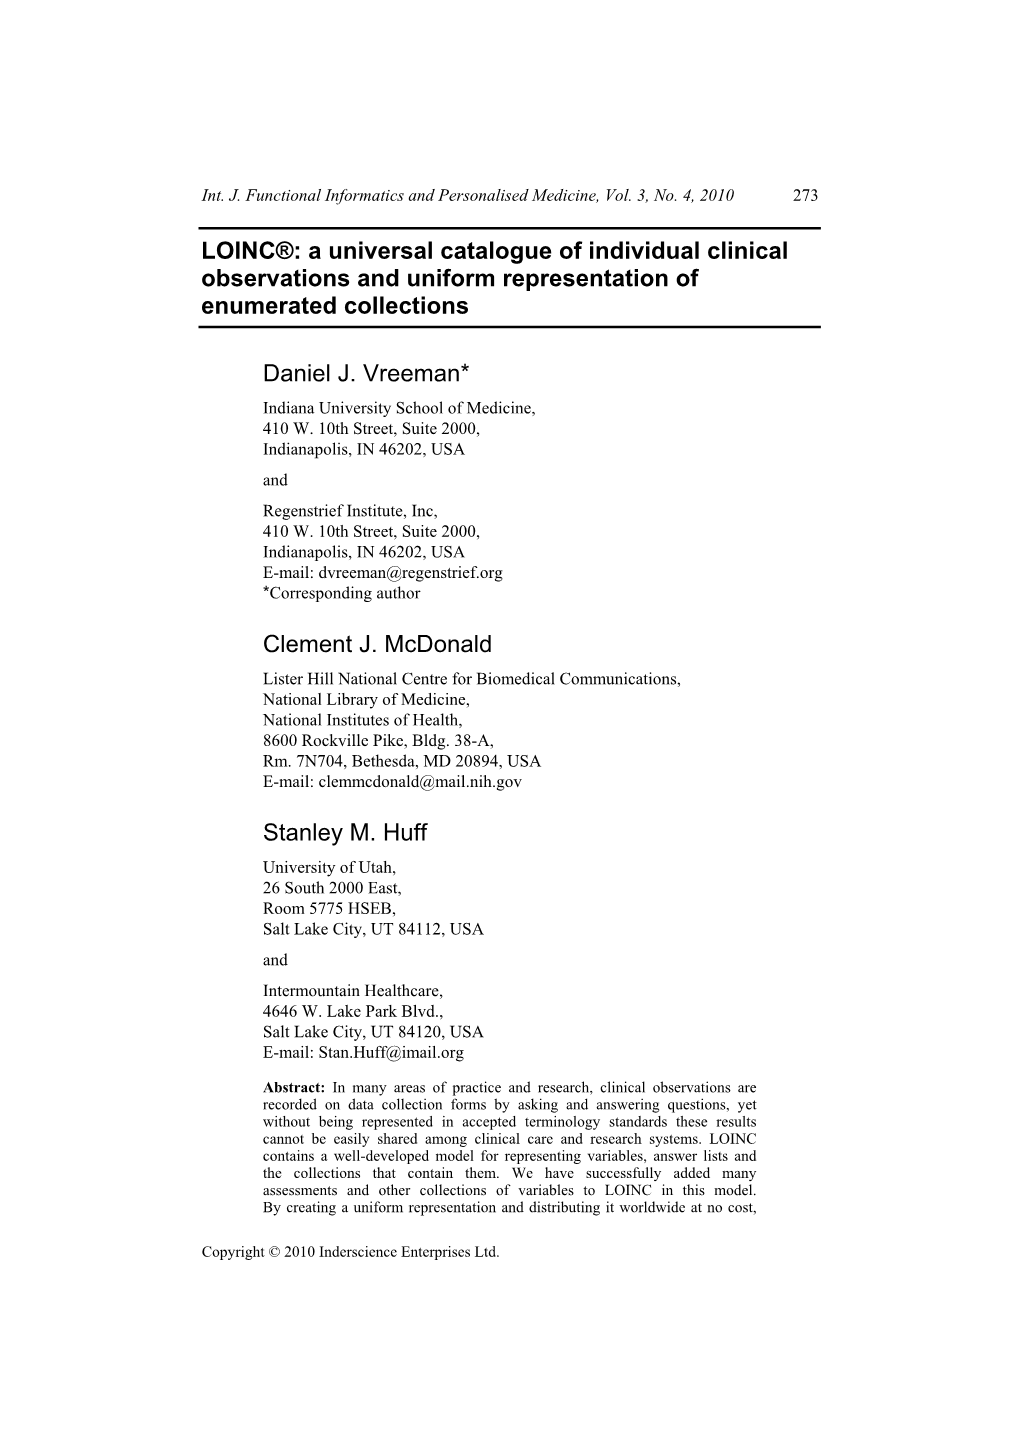 LOINC®: a Universal Catalogue of Individual Clinical Observations and Uniform Representation of Enumerated Collections